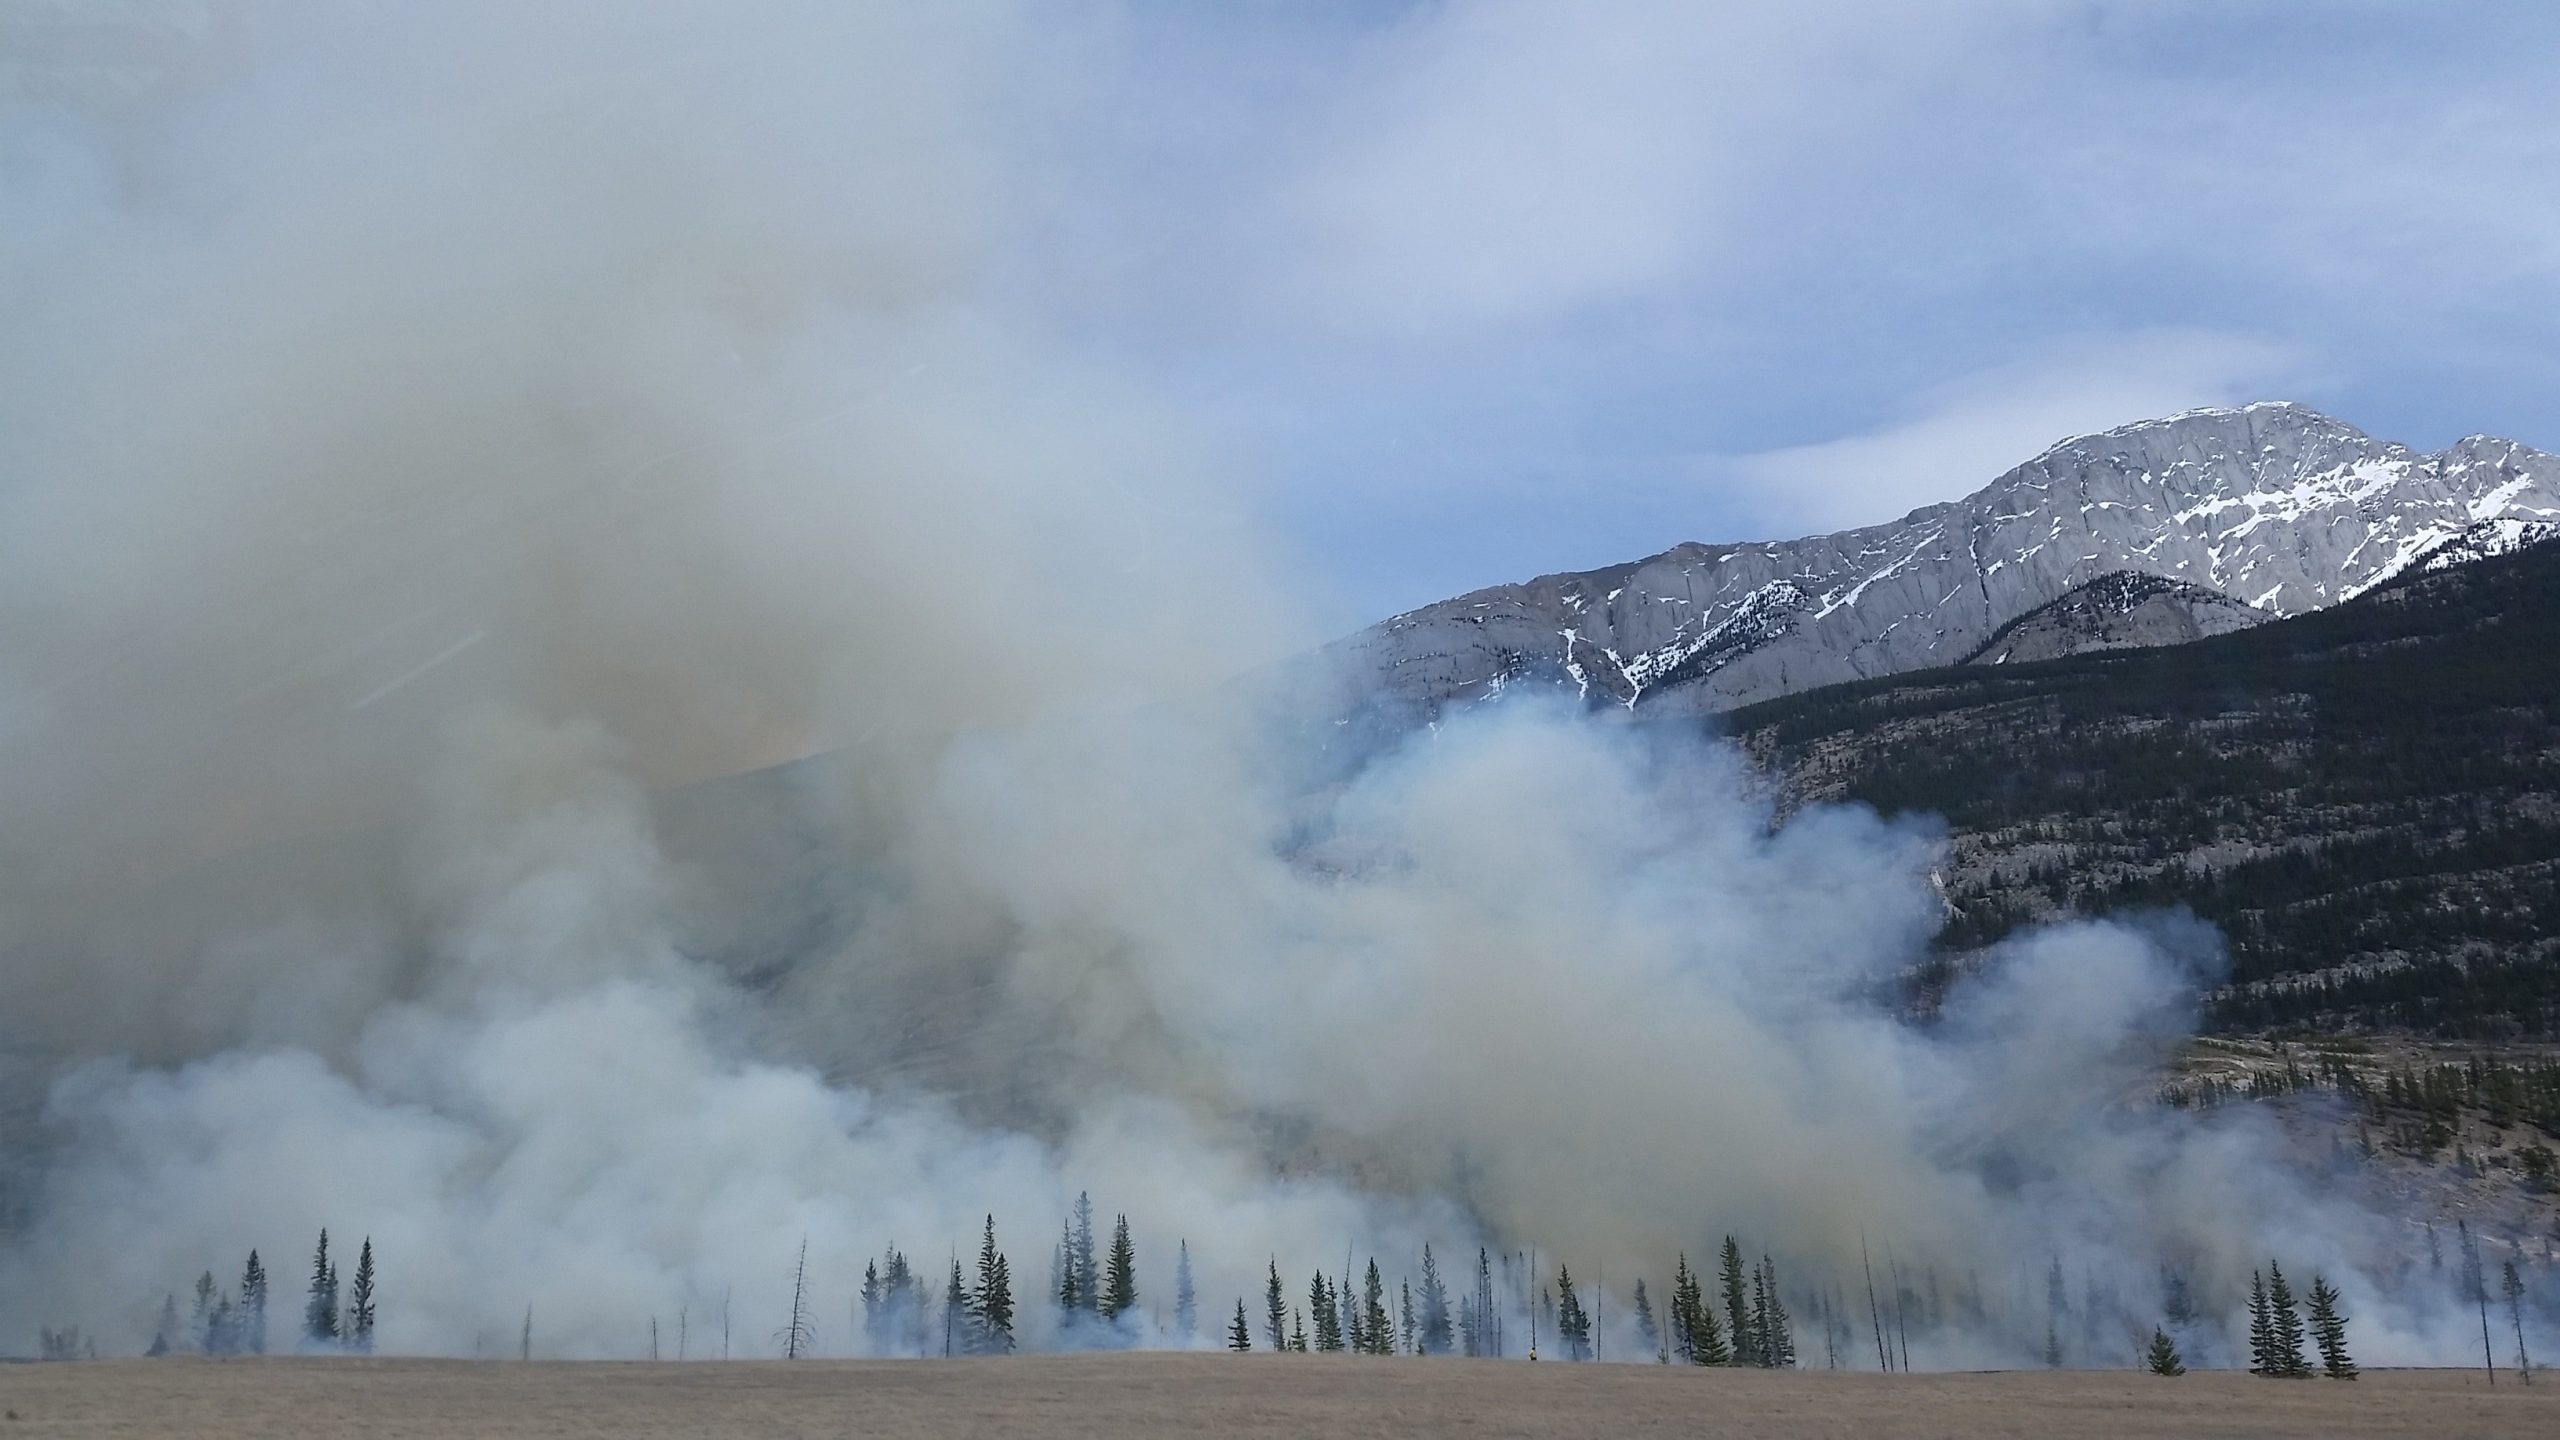 Climate Change-induced wildfire smoke obscuring a mountainous landscape.